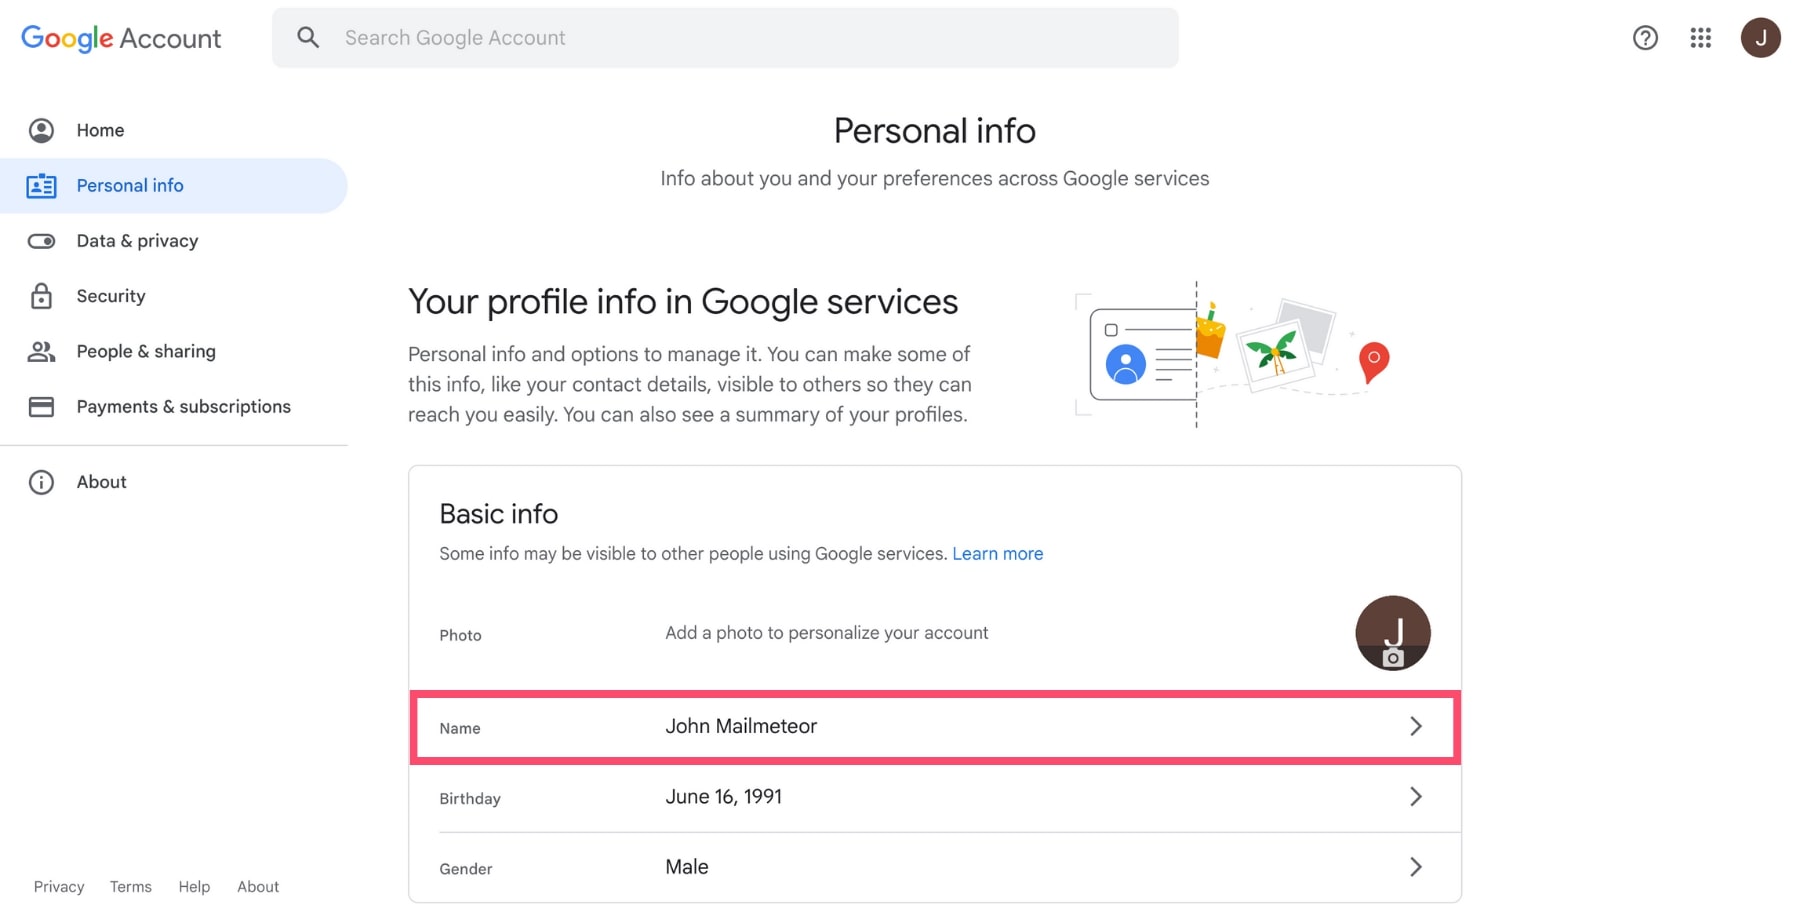 Basic info of your Google Account